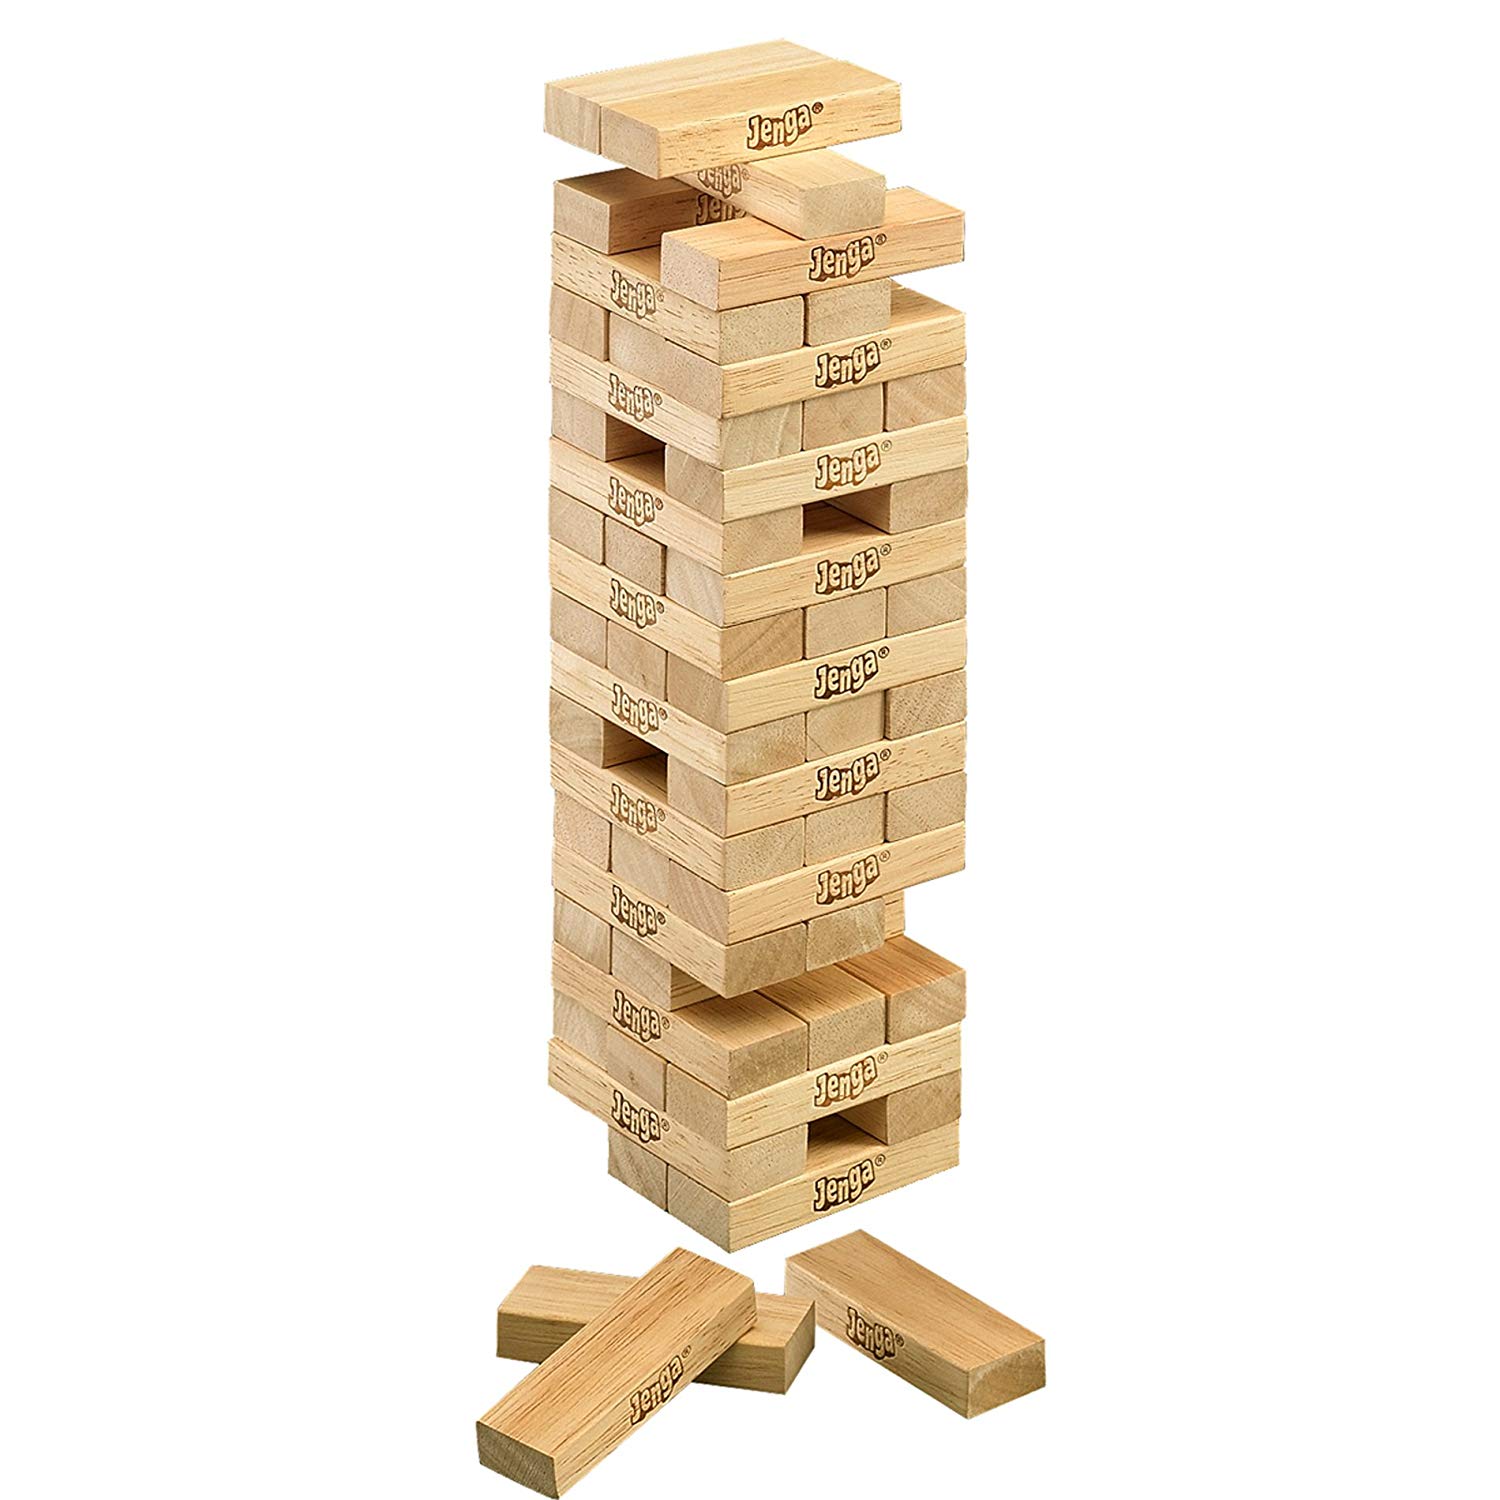 The best building game - Jenga